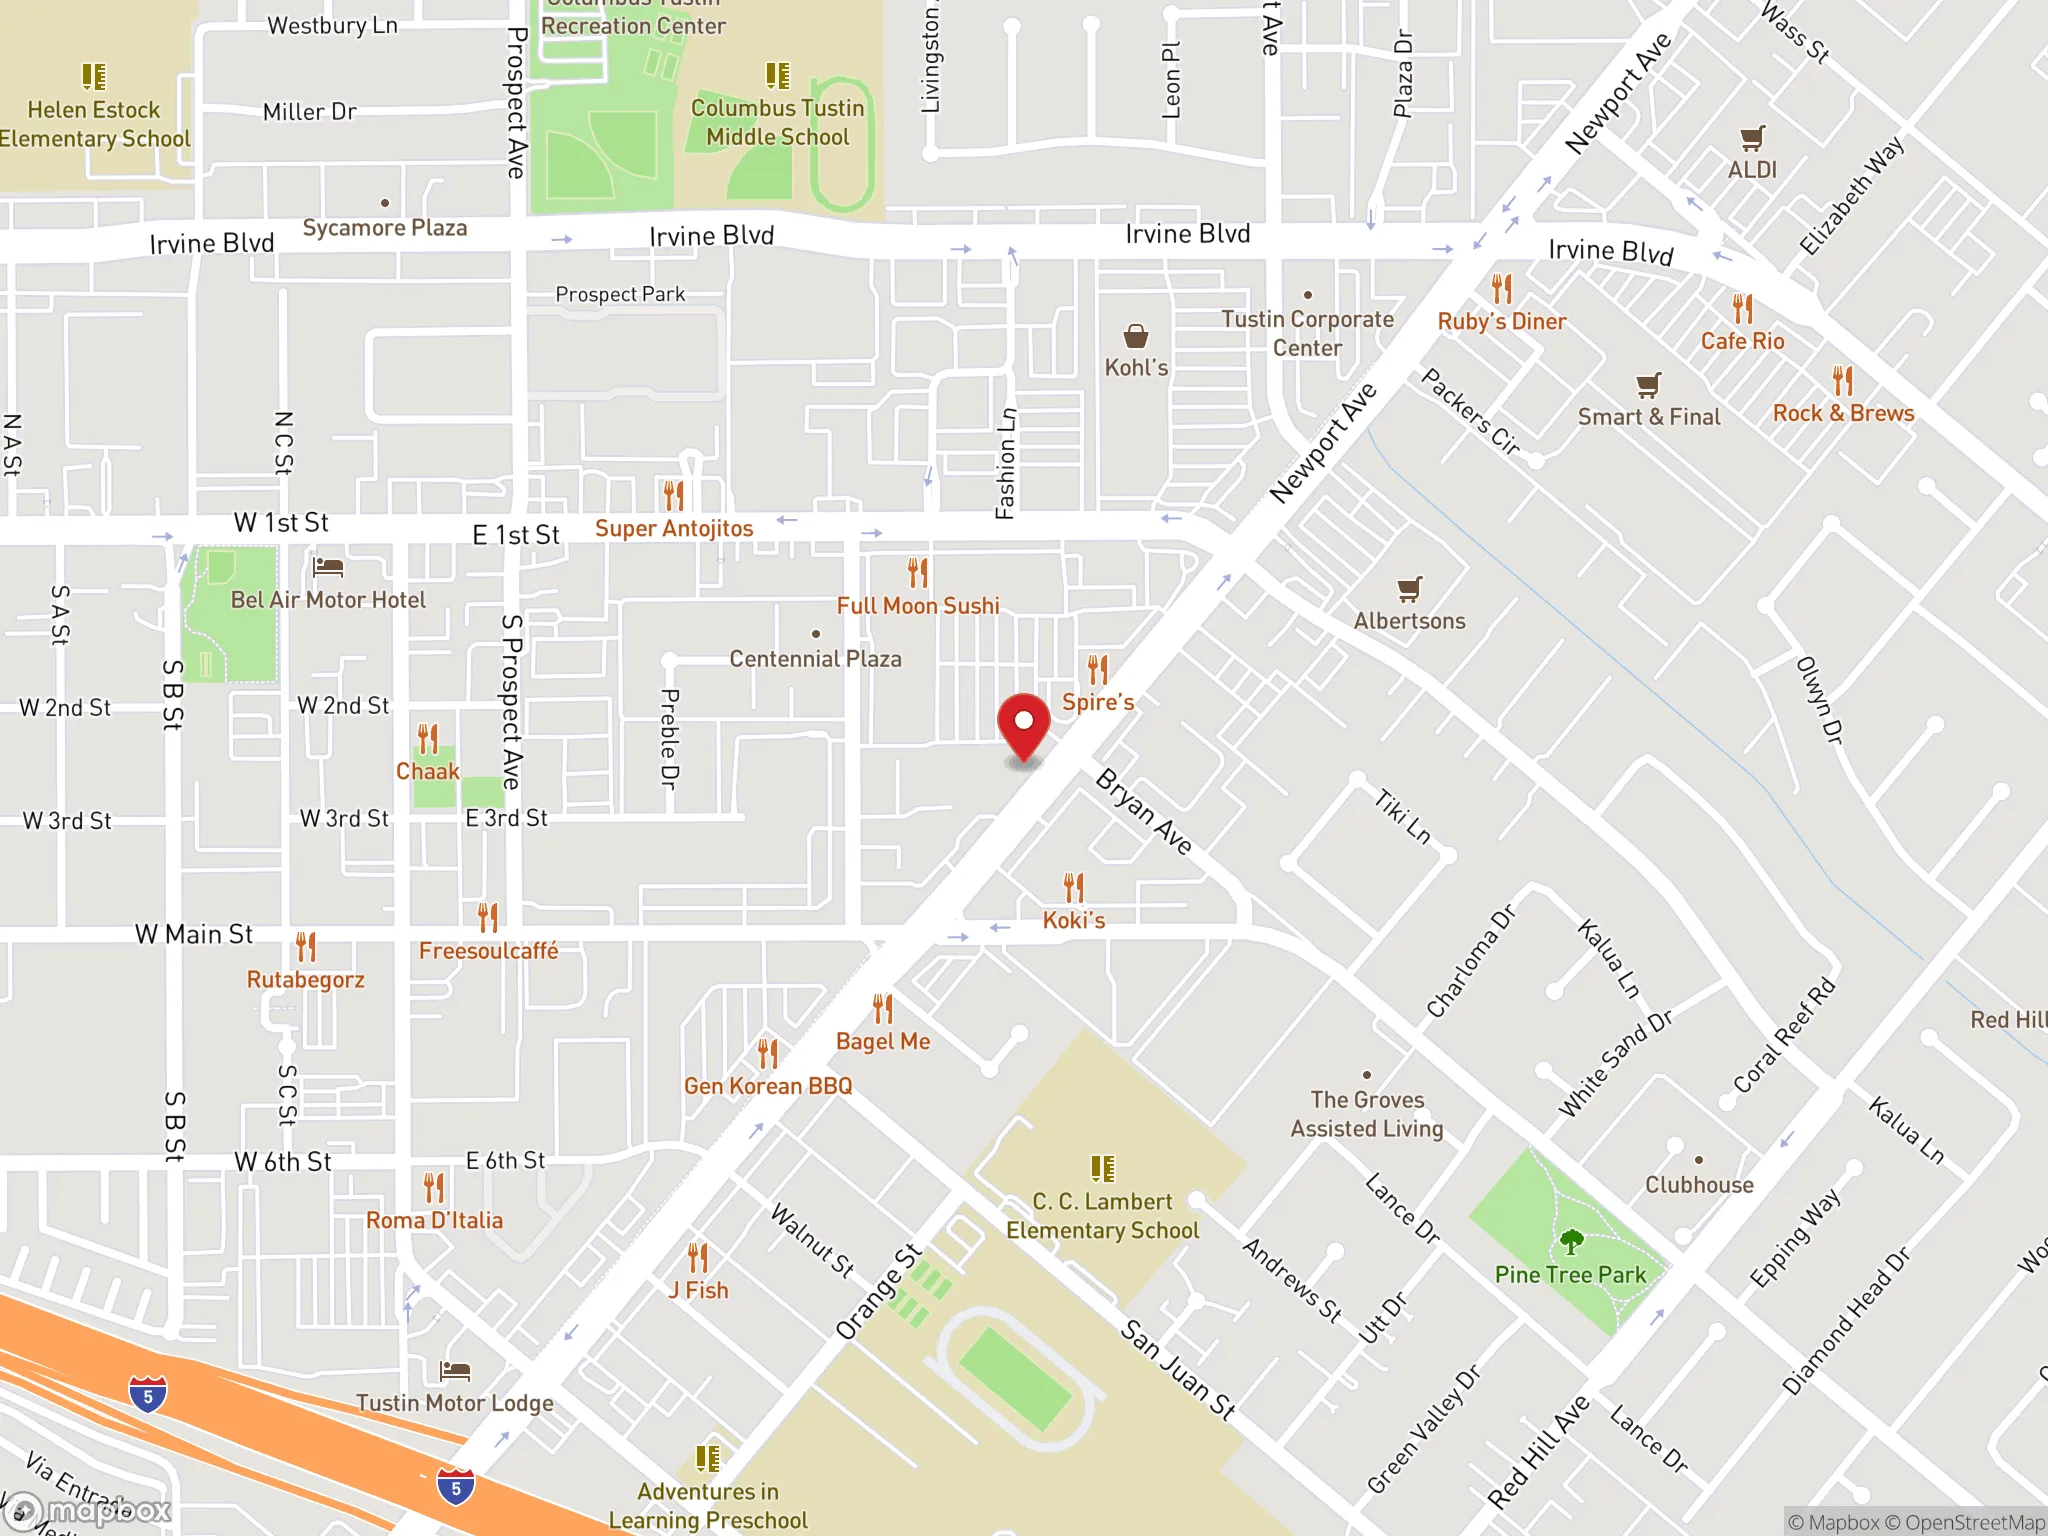 Map showing location of Dave's Hot Chicken restaurant in Tustin, California.